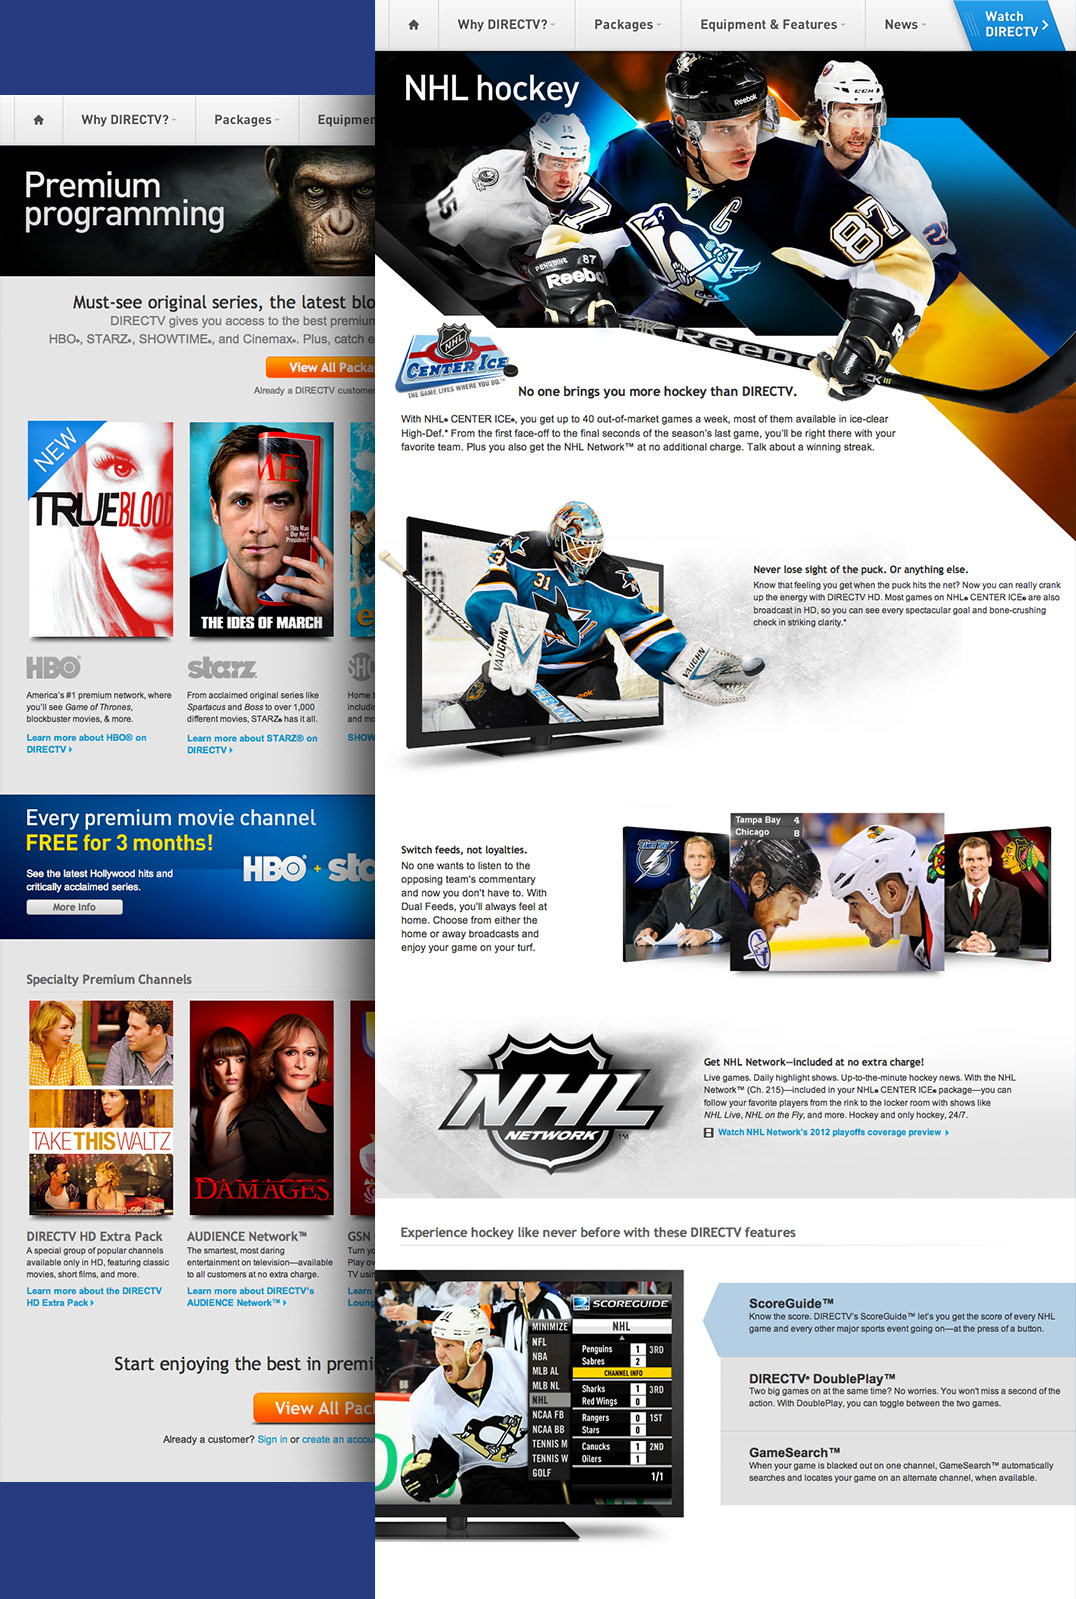 dtv_w_screen_nhl_and_premiums_2